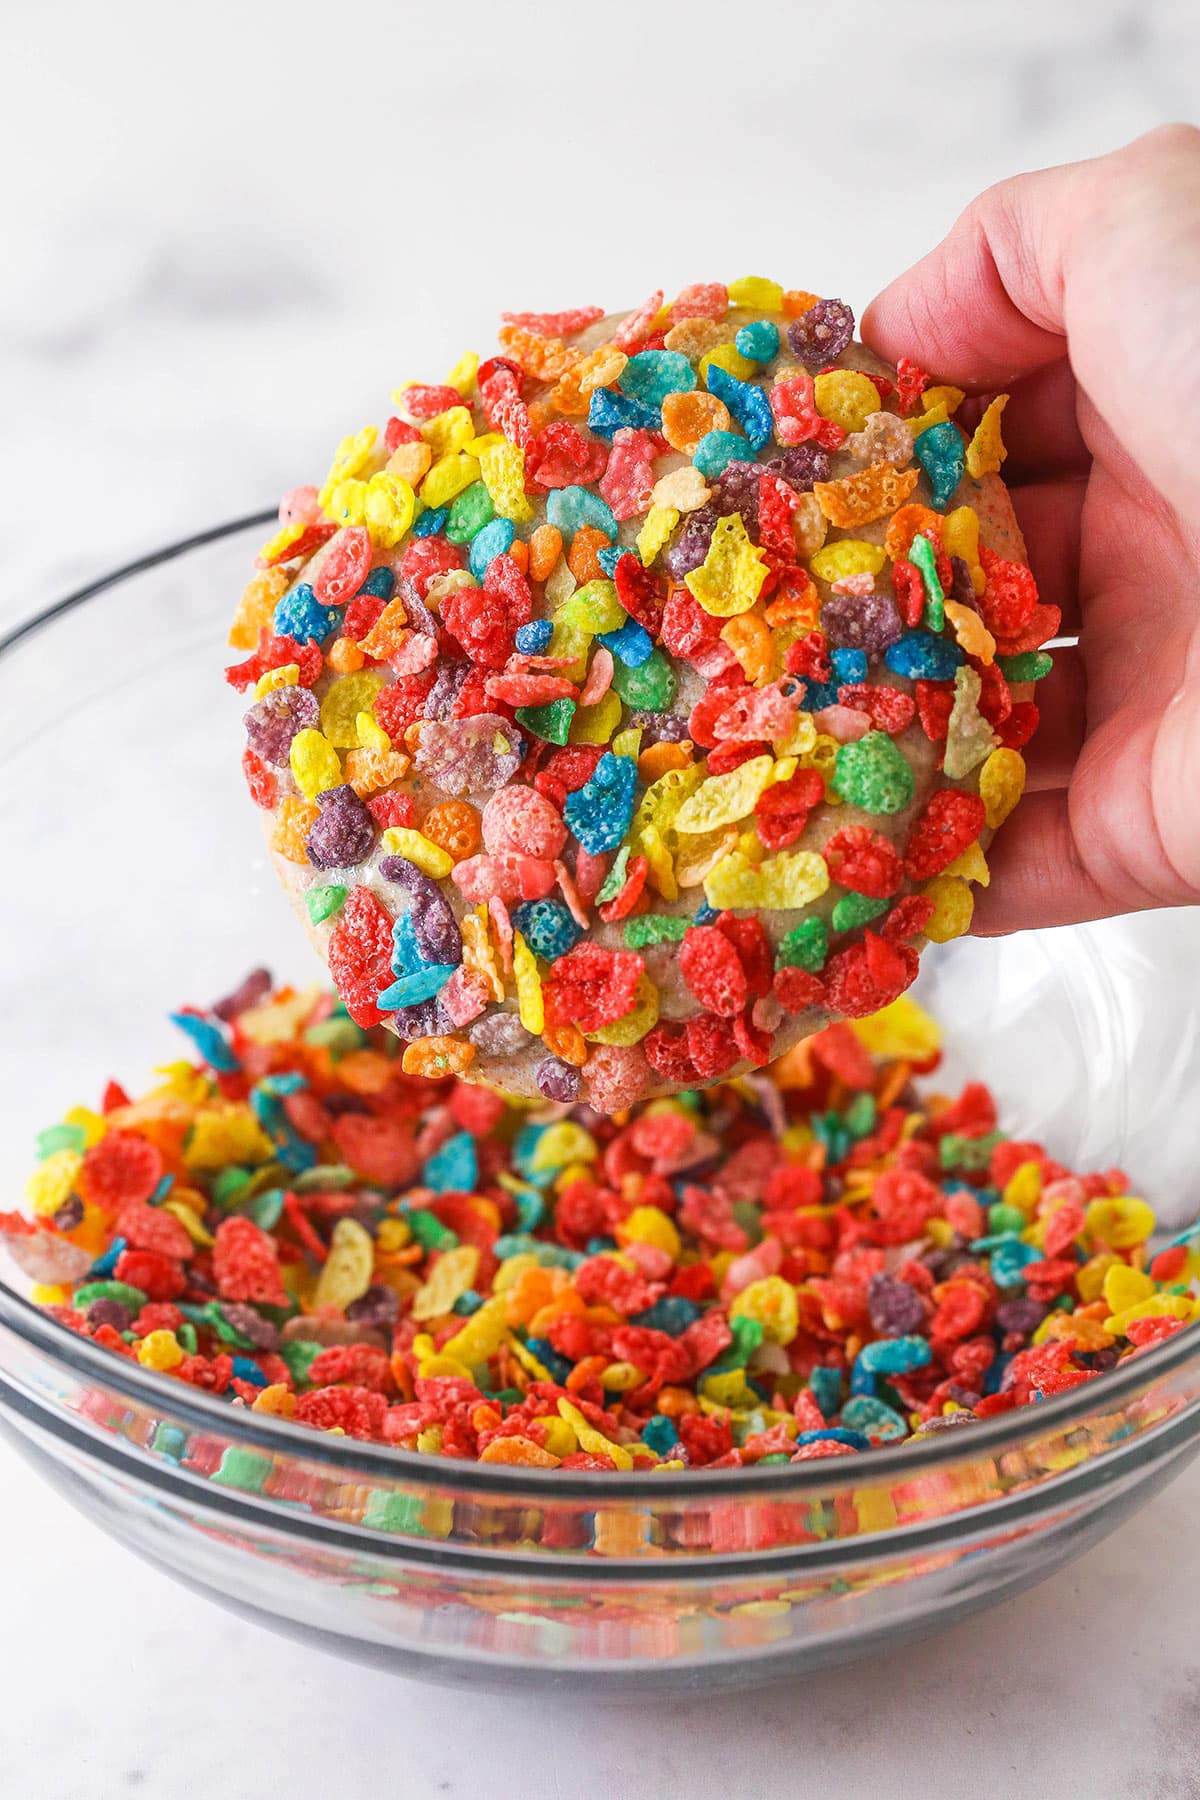 Coating a Fruity Pebbles cookie in Fruity Pebbles in a bowl.